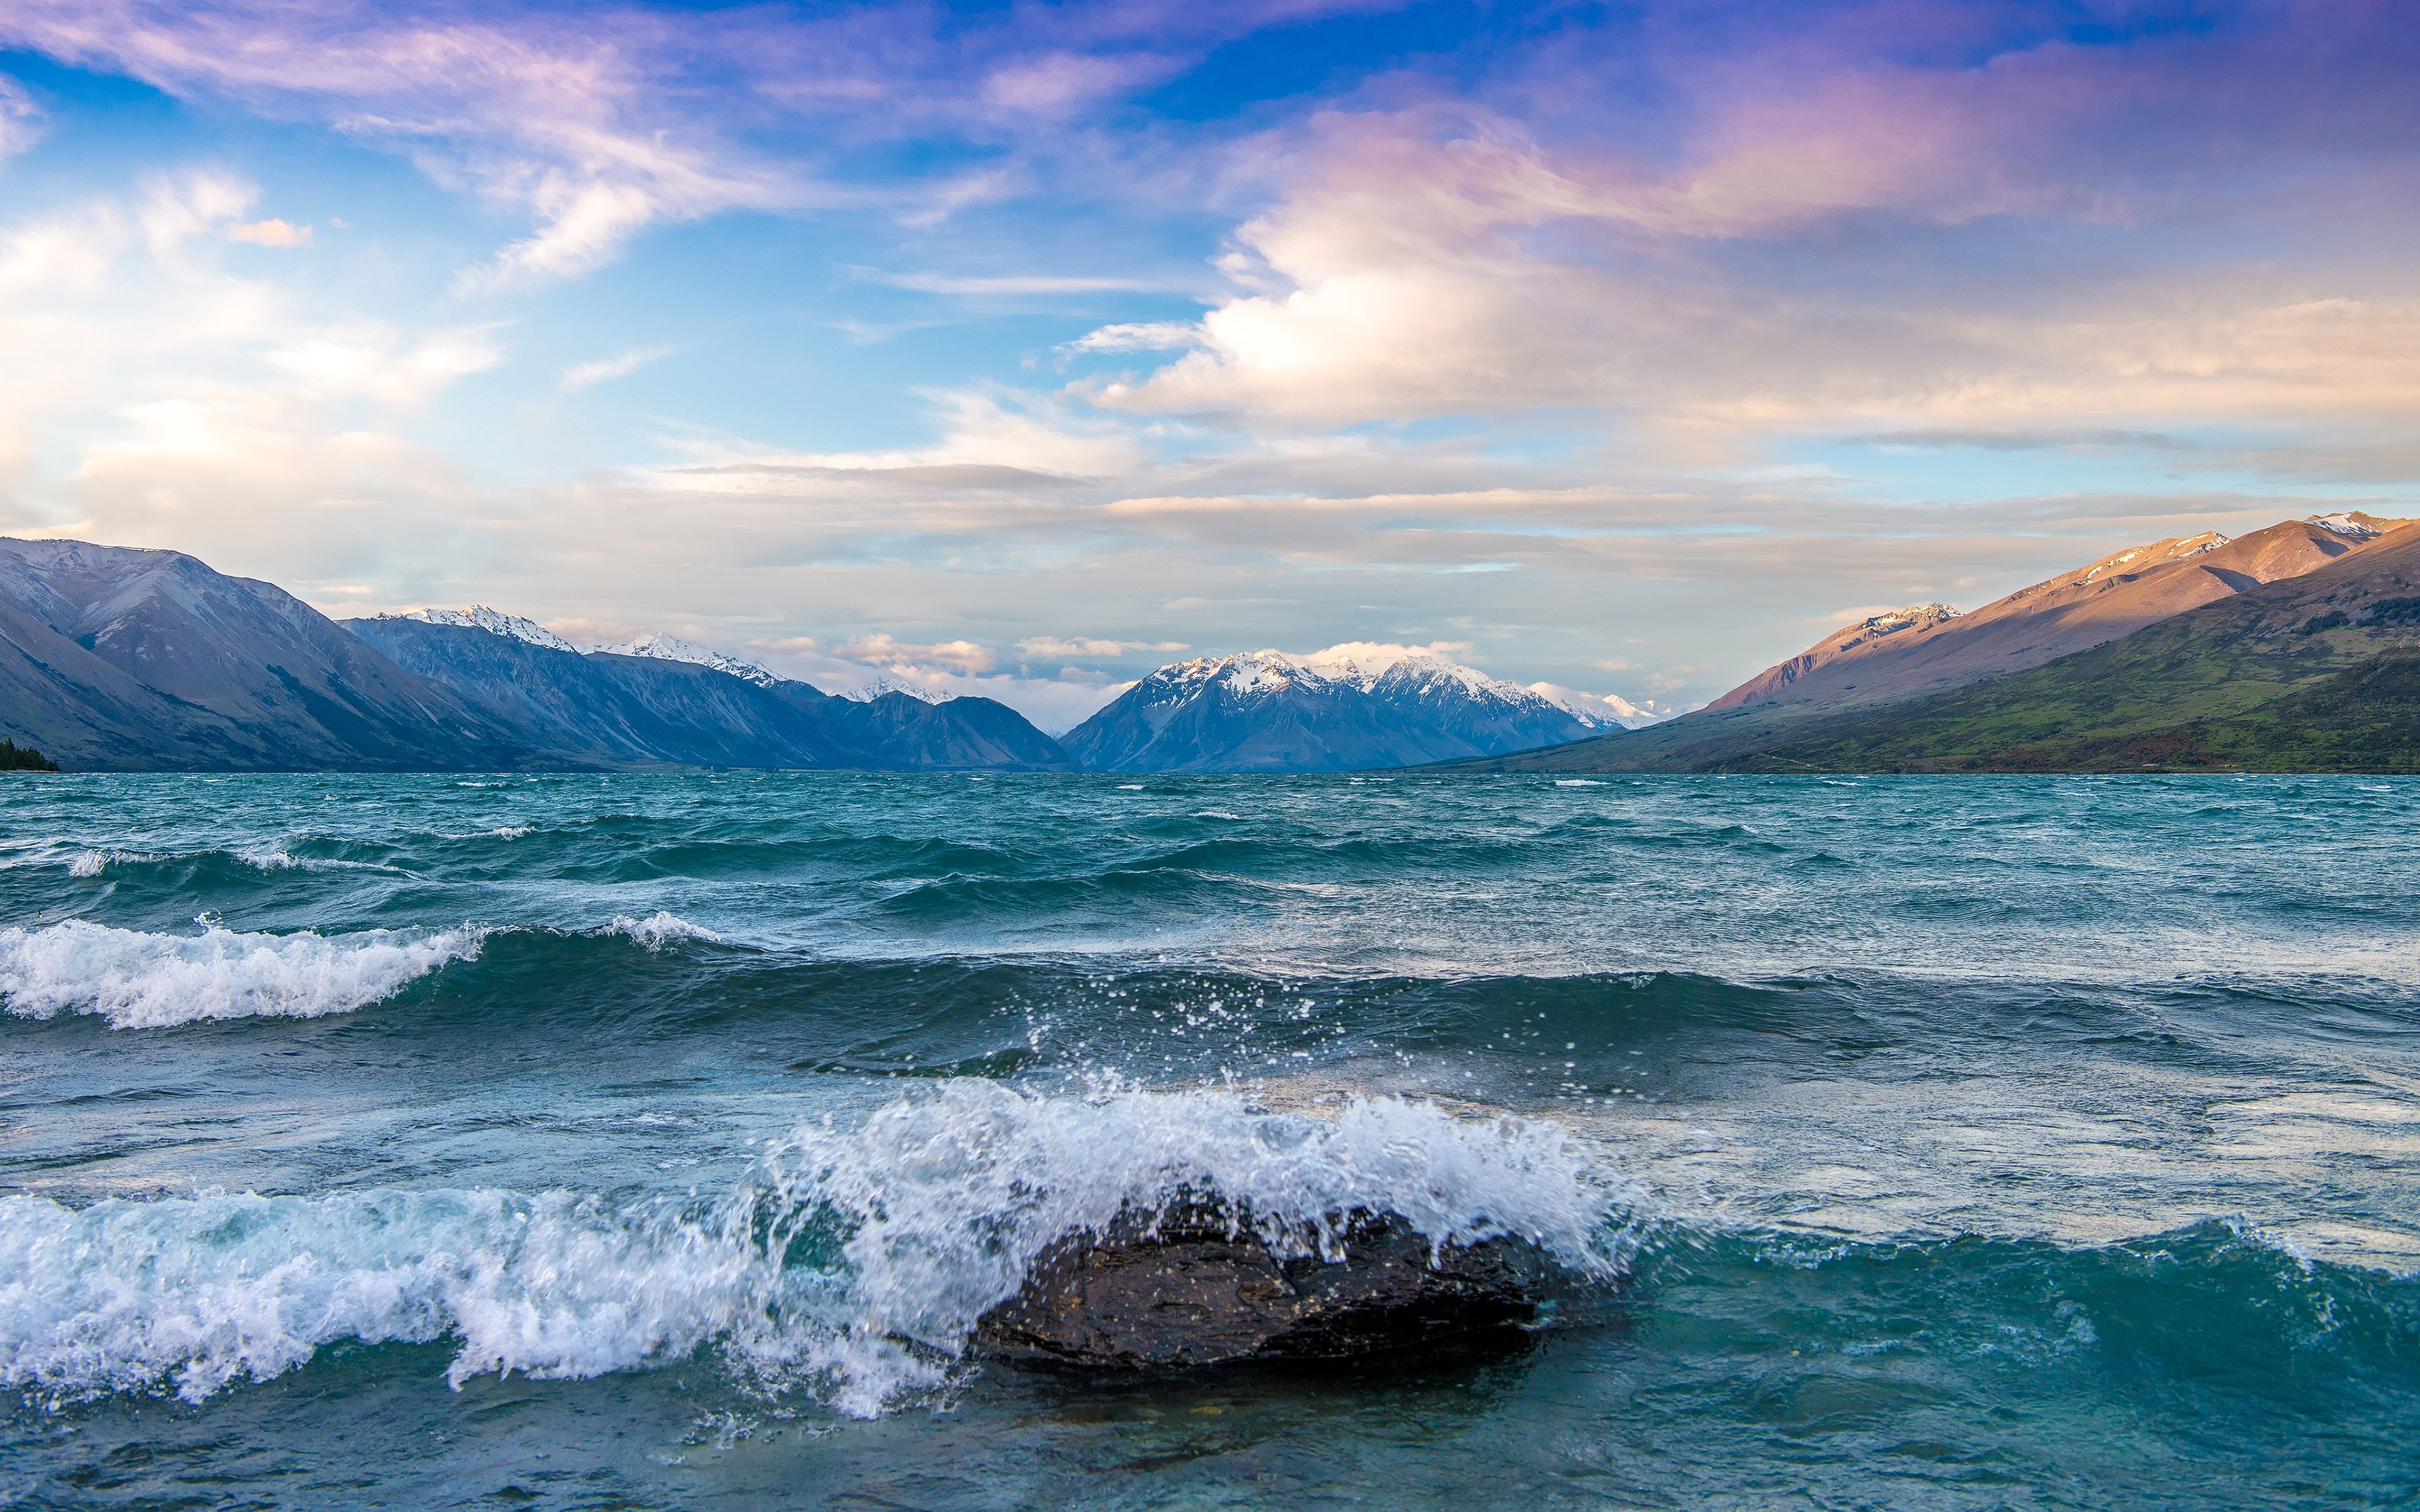 A wave crashes against a rock in the foreground of a mountain lake. - Lake